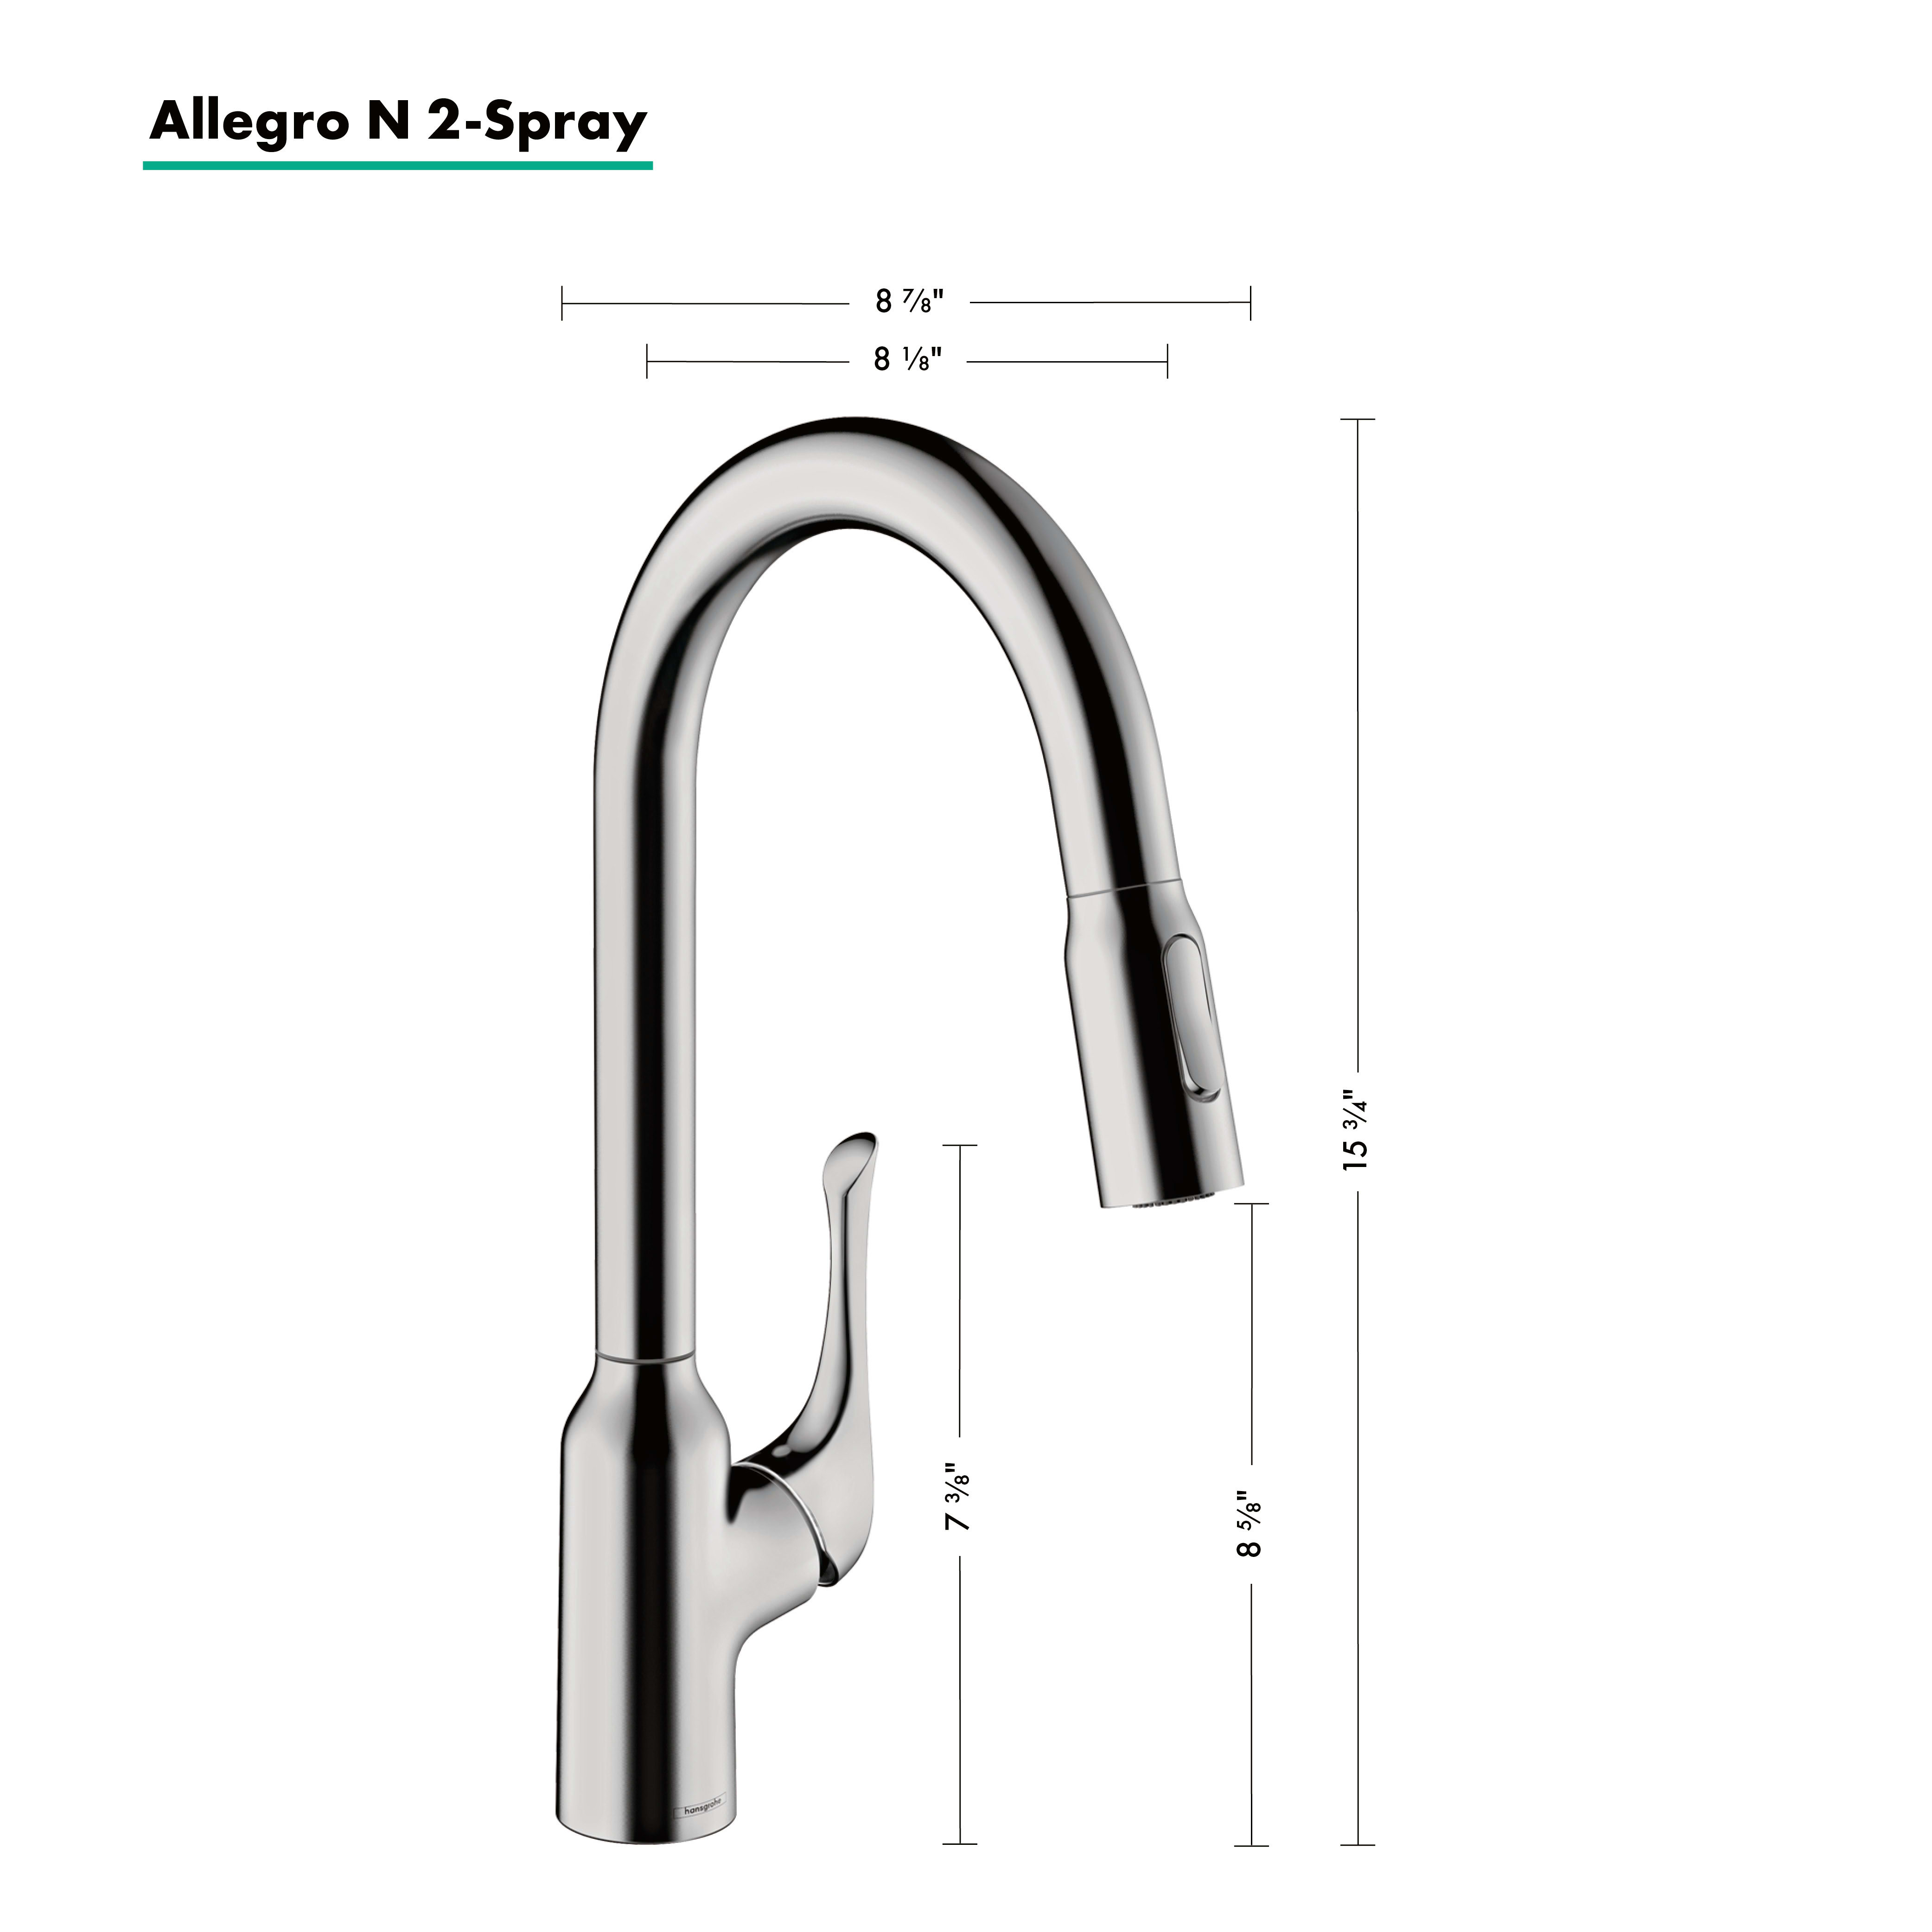 Hansgrohe 71843001 Chrome Allegro N 1 75 Gpm Single Hole Pull Down